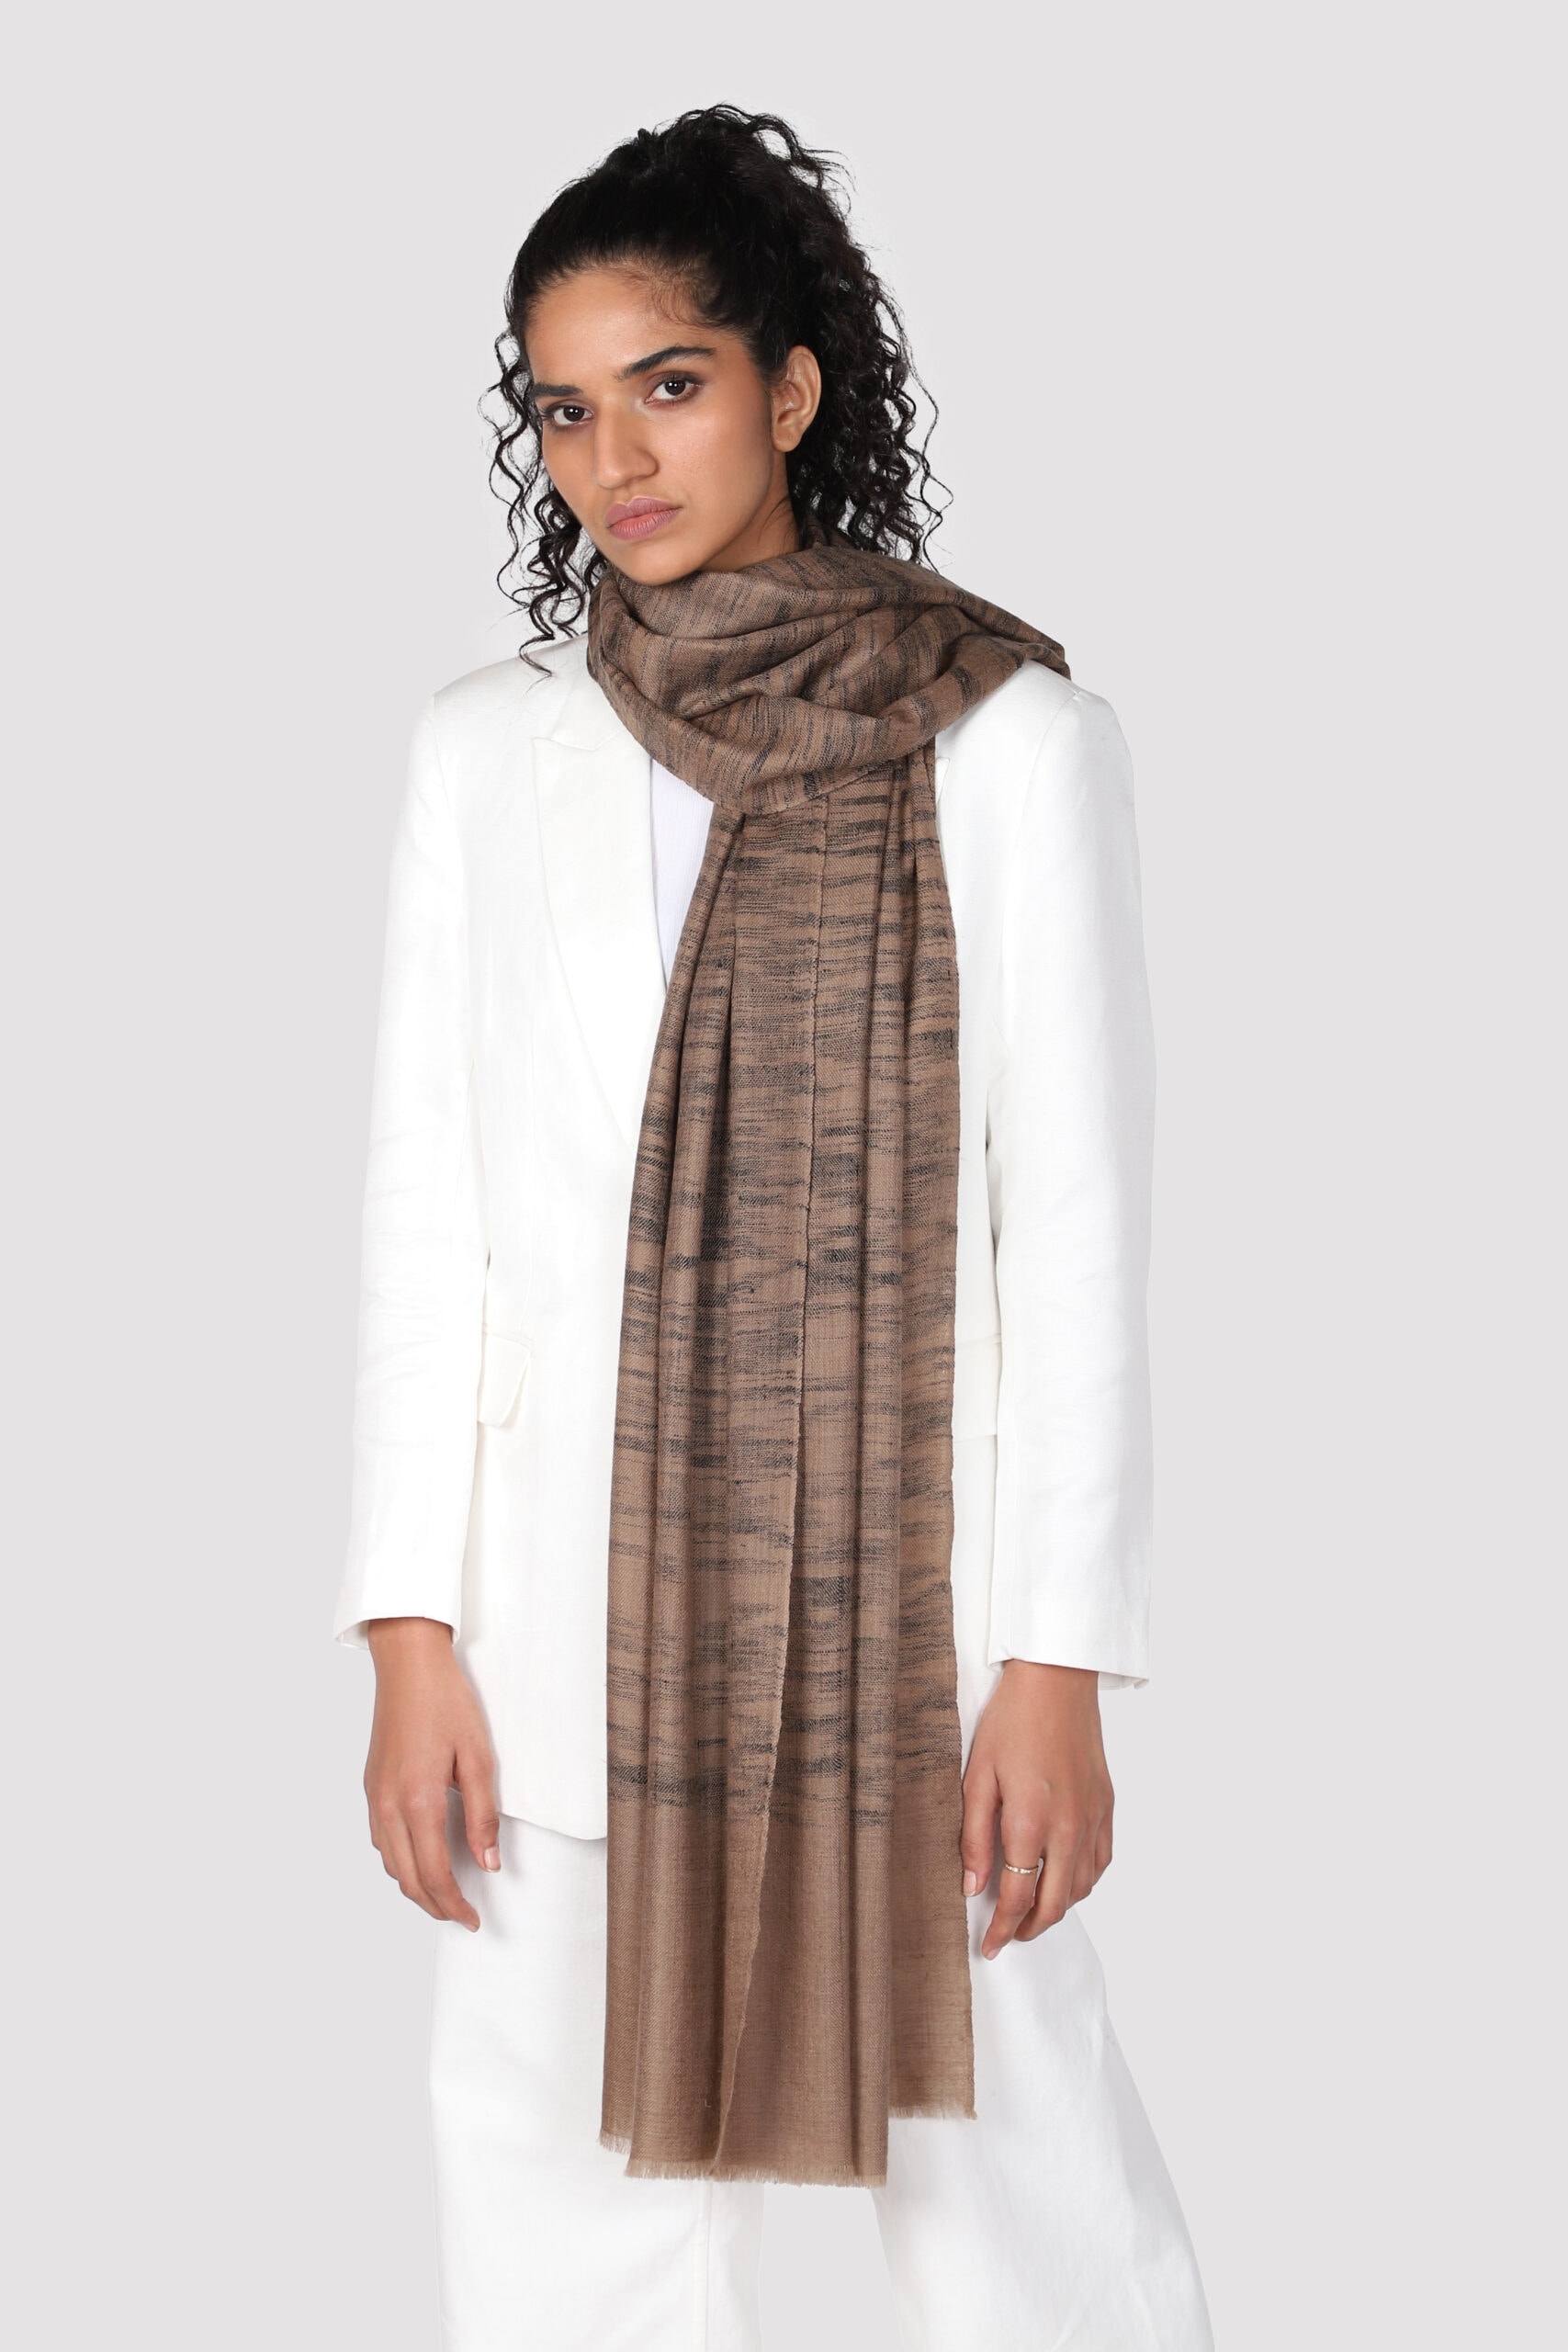 Woman in brown and black shaded ikat shawl - Me and K